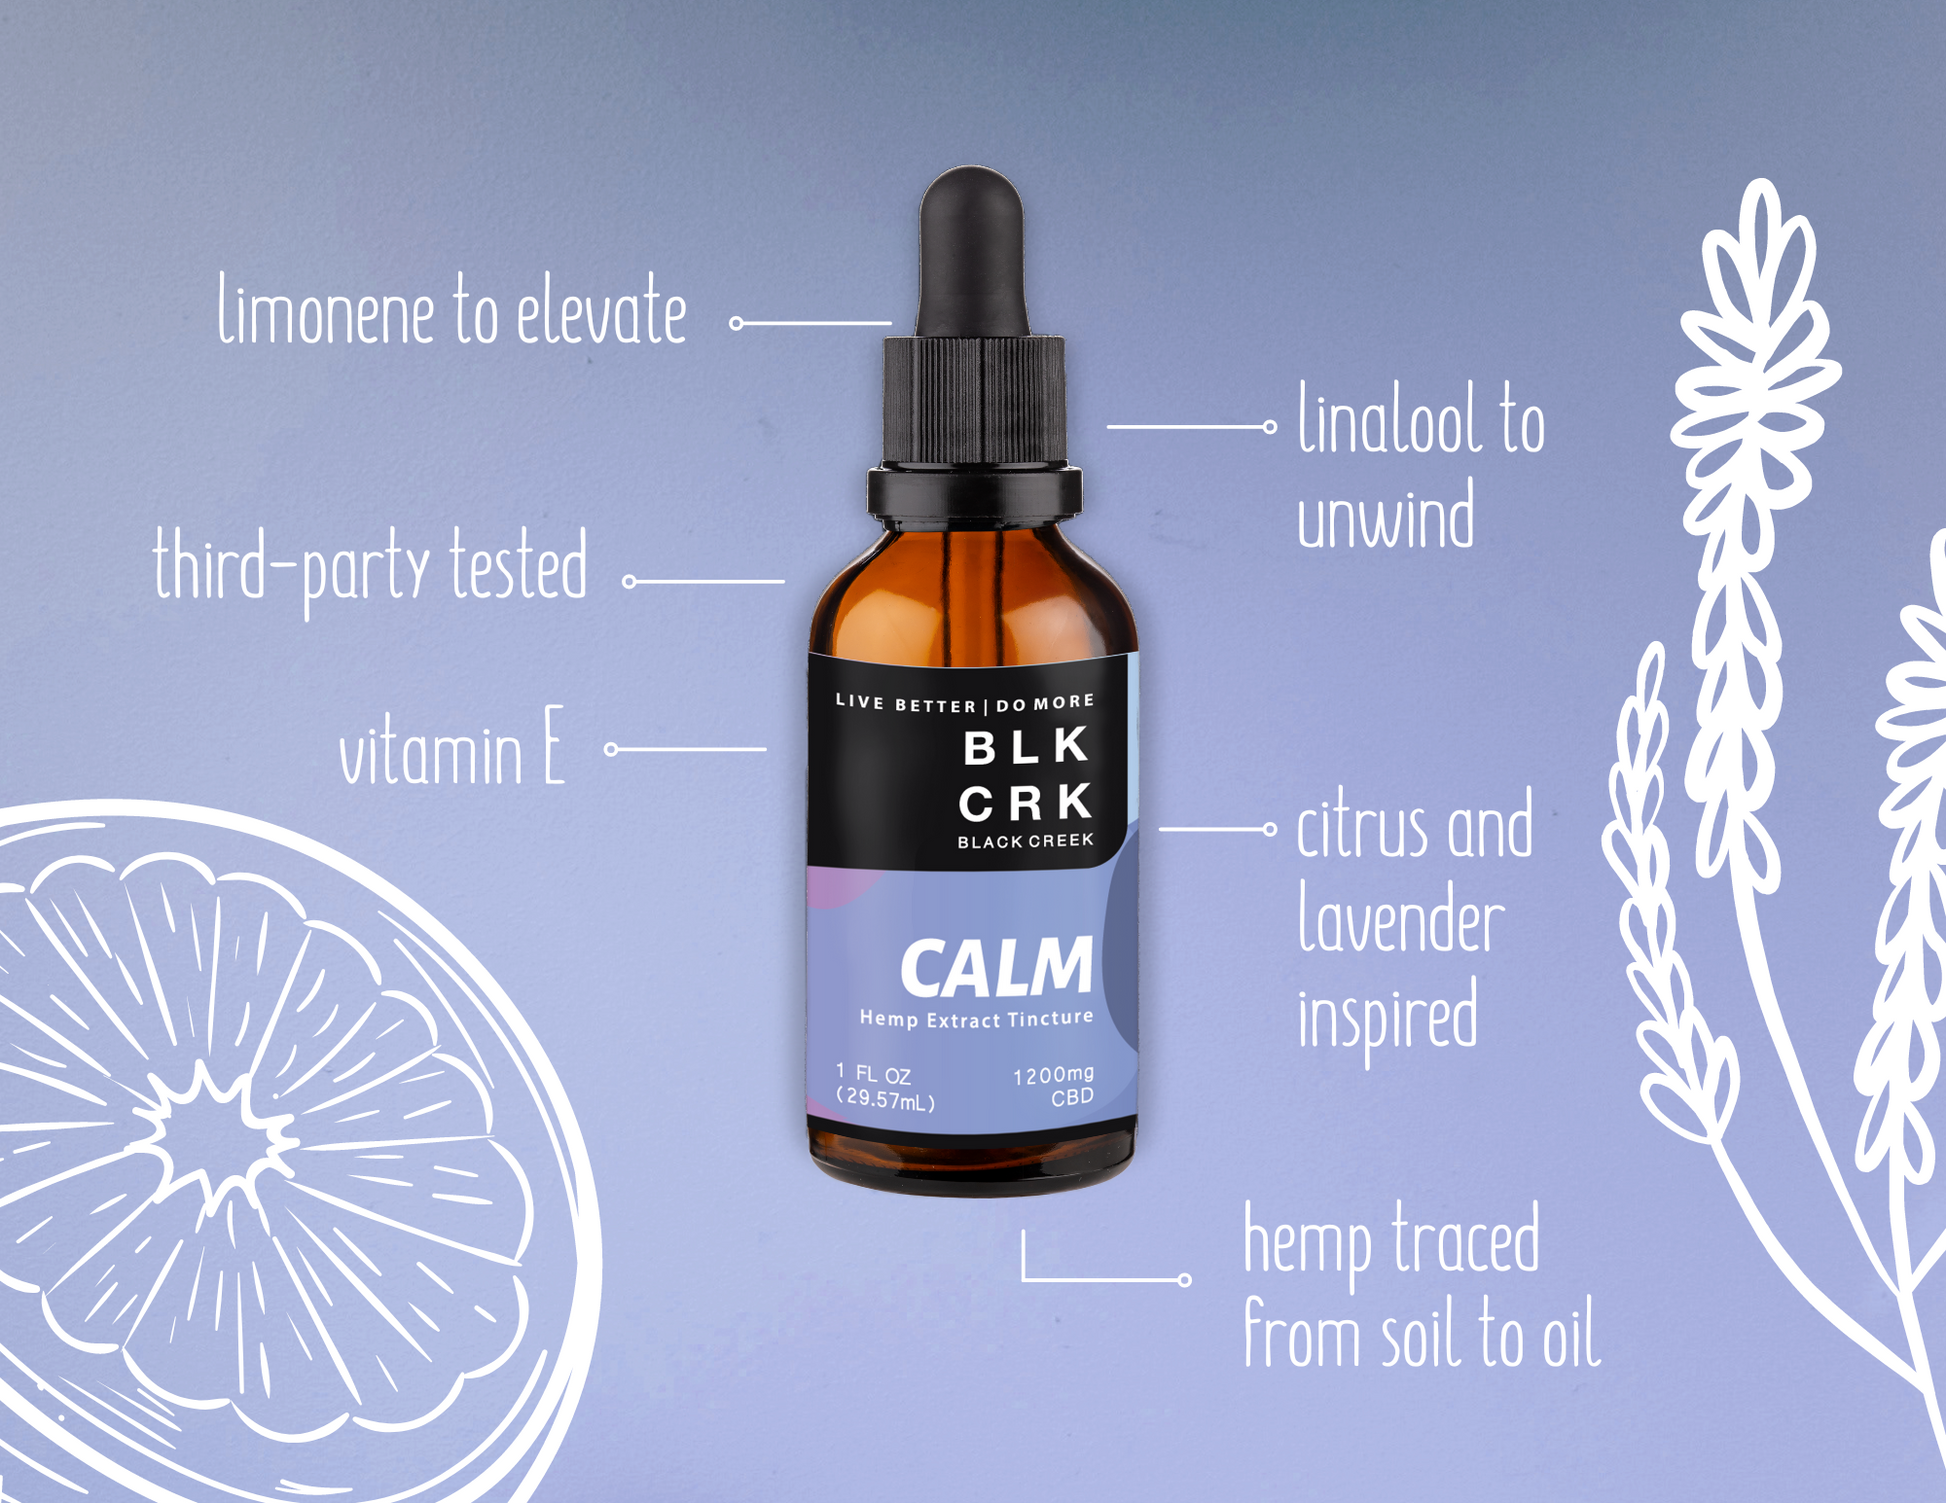 A Black Creek CBD Calm Tincture on a purple background with text that describes its ingredients. The terpene limonene to elevate, third party tested, vitamin E, the terpene linalool to unwind, citrus and lavender inspired, and hemp traced from soil to oil